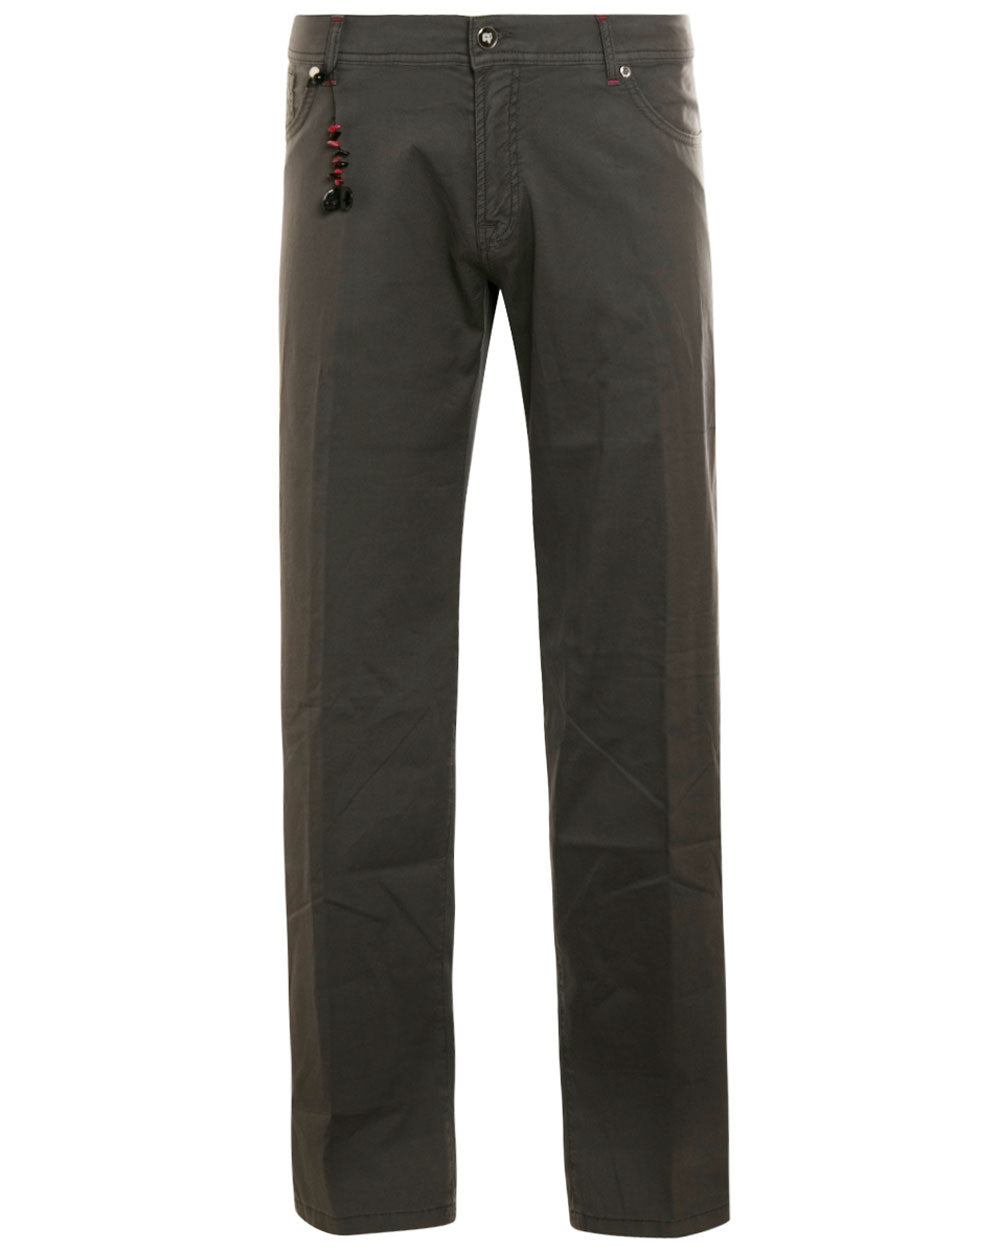 Cotton Stretch Casual Pant in Taupe